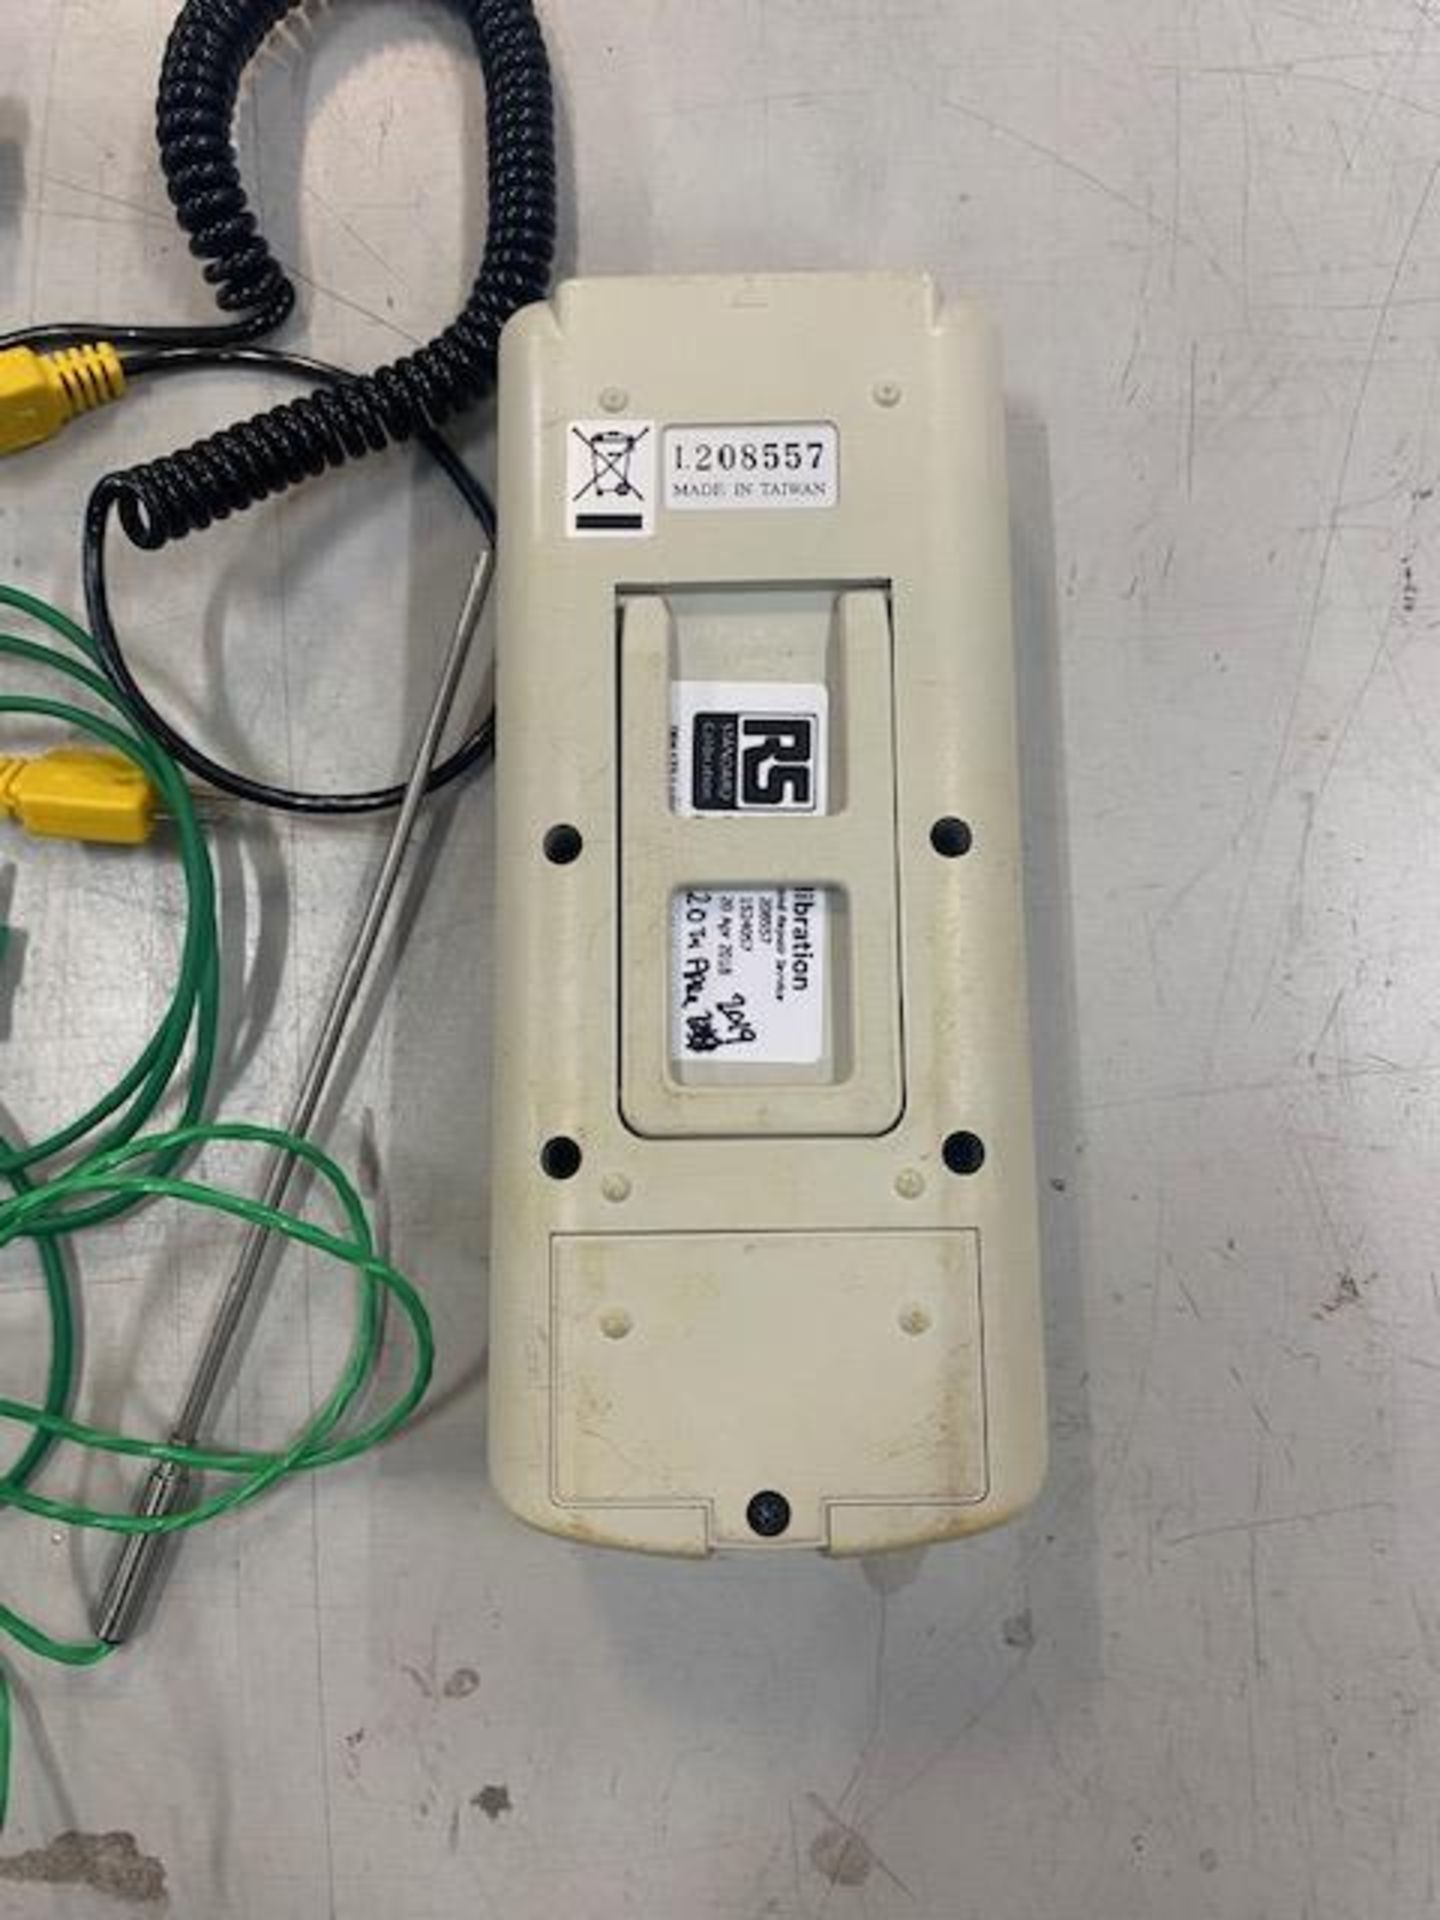 RS 389-4296 thermometer and calibrator, S/N 1208557 (Located Upminster) - Image 3 of 5